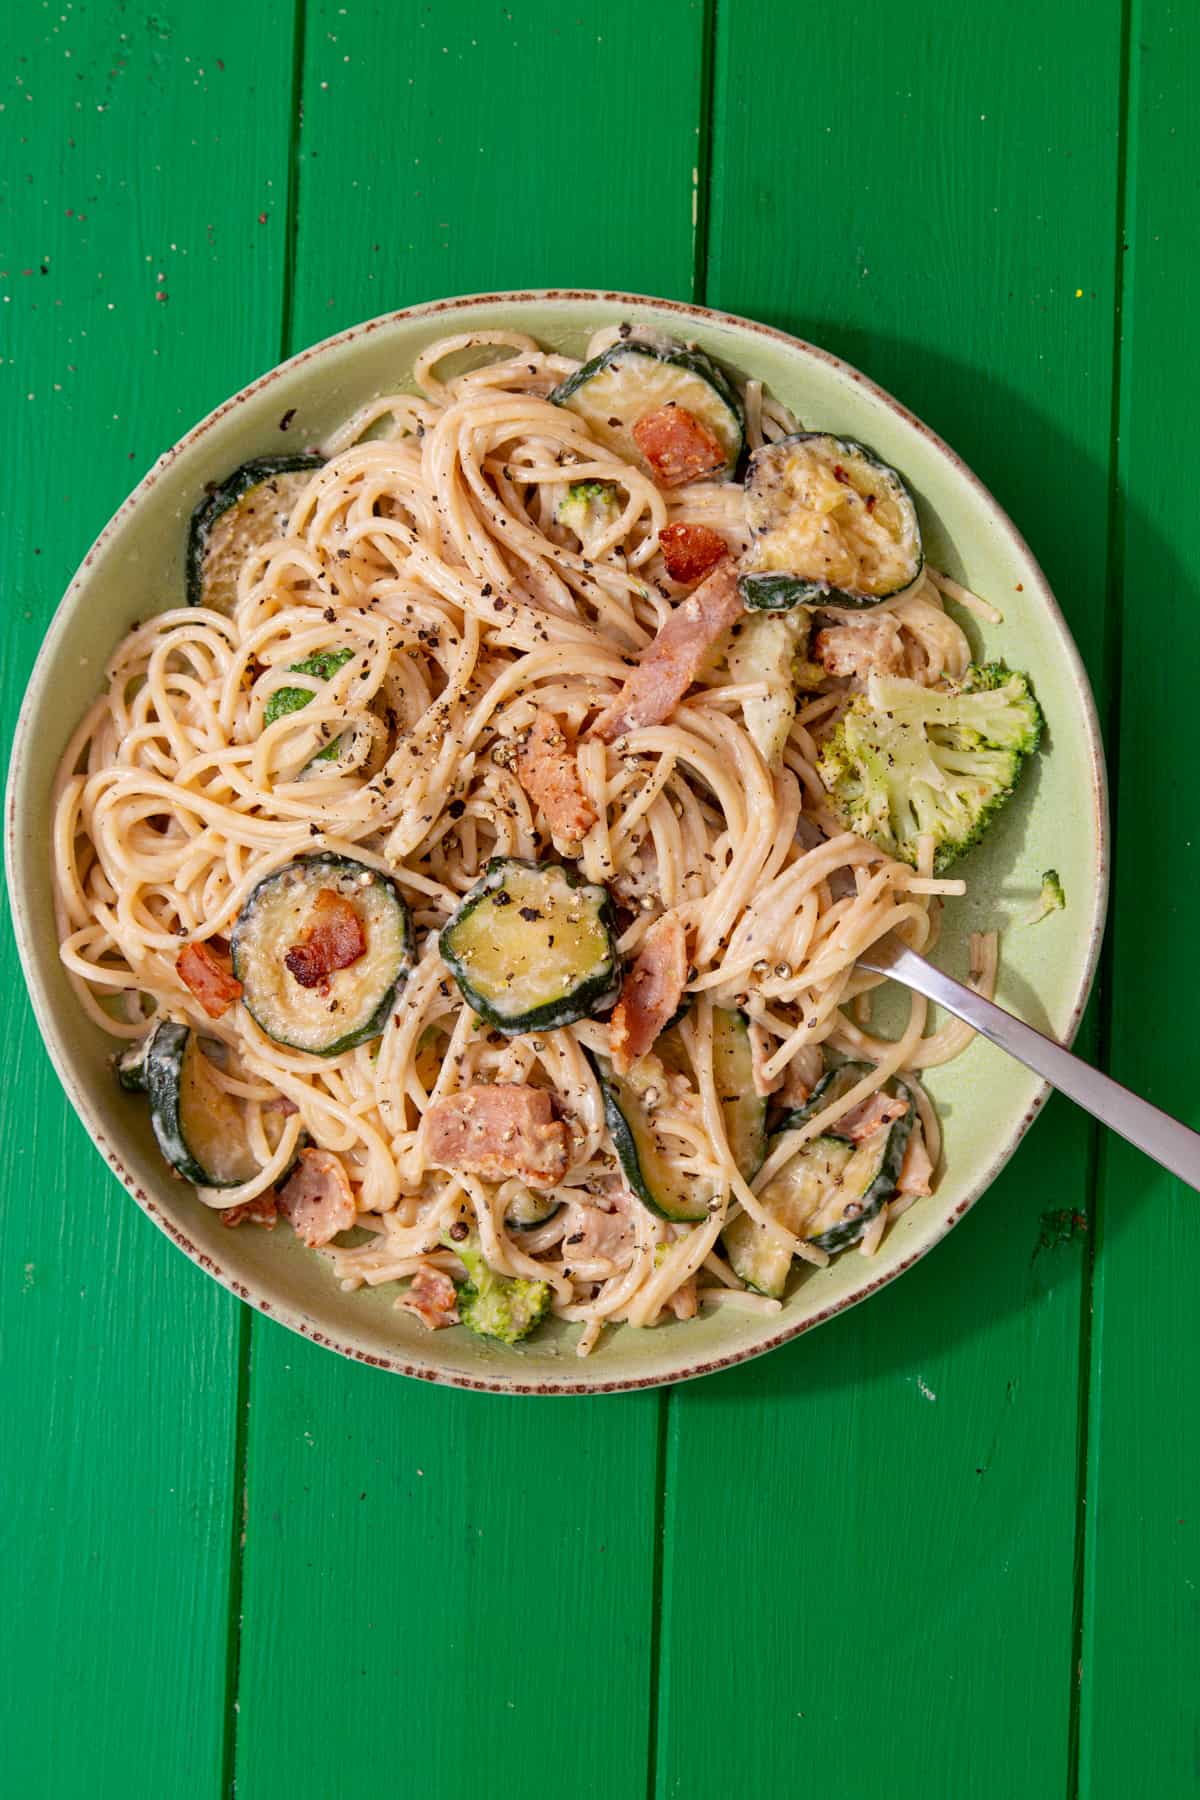 Creamy spaghetti with courgette rounds, bacon and broccoli in a bowl on a green background.